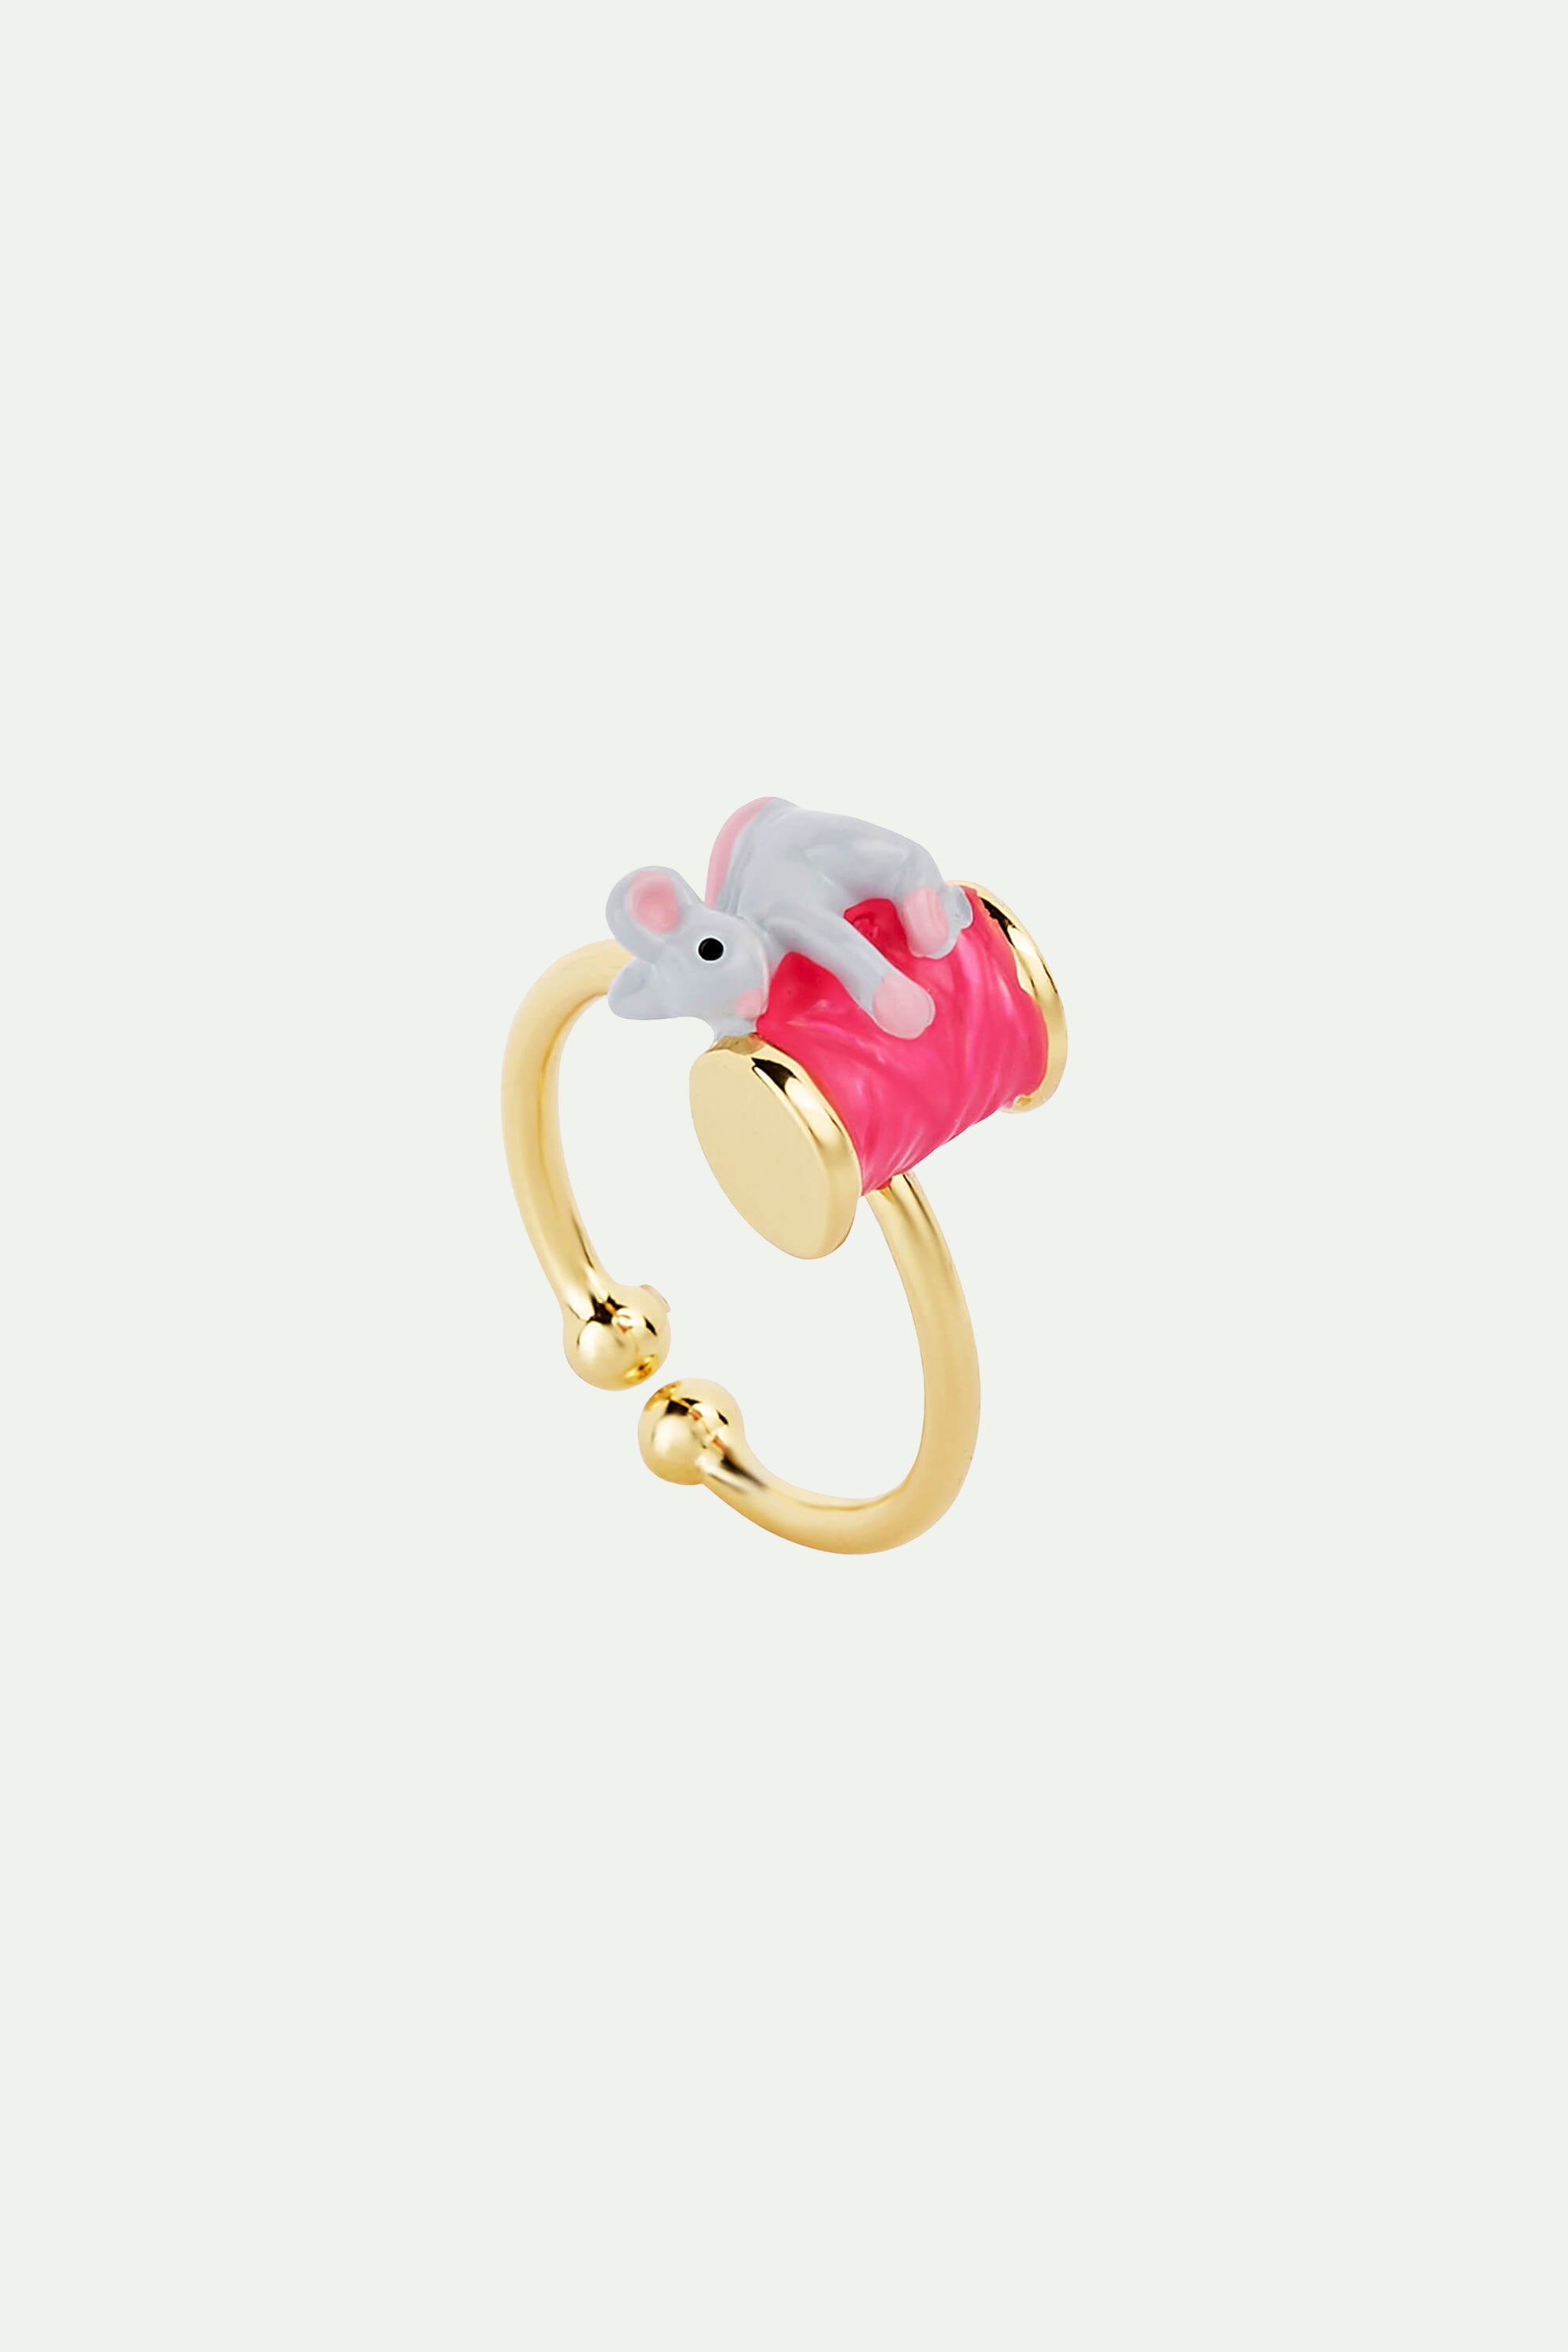 Mouse and Spool of Thread adjustable ring